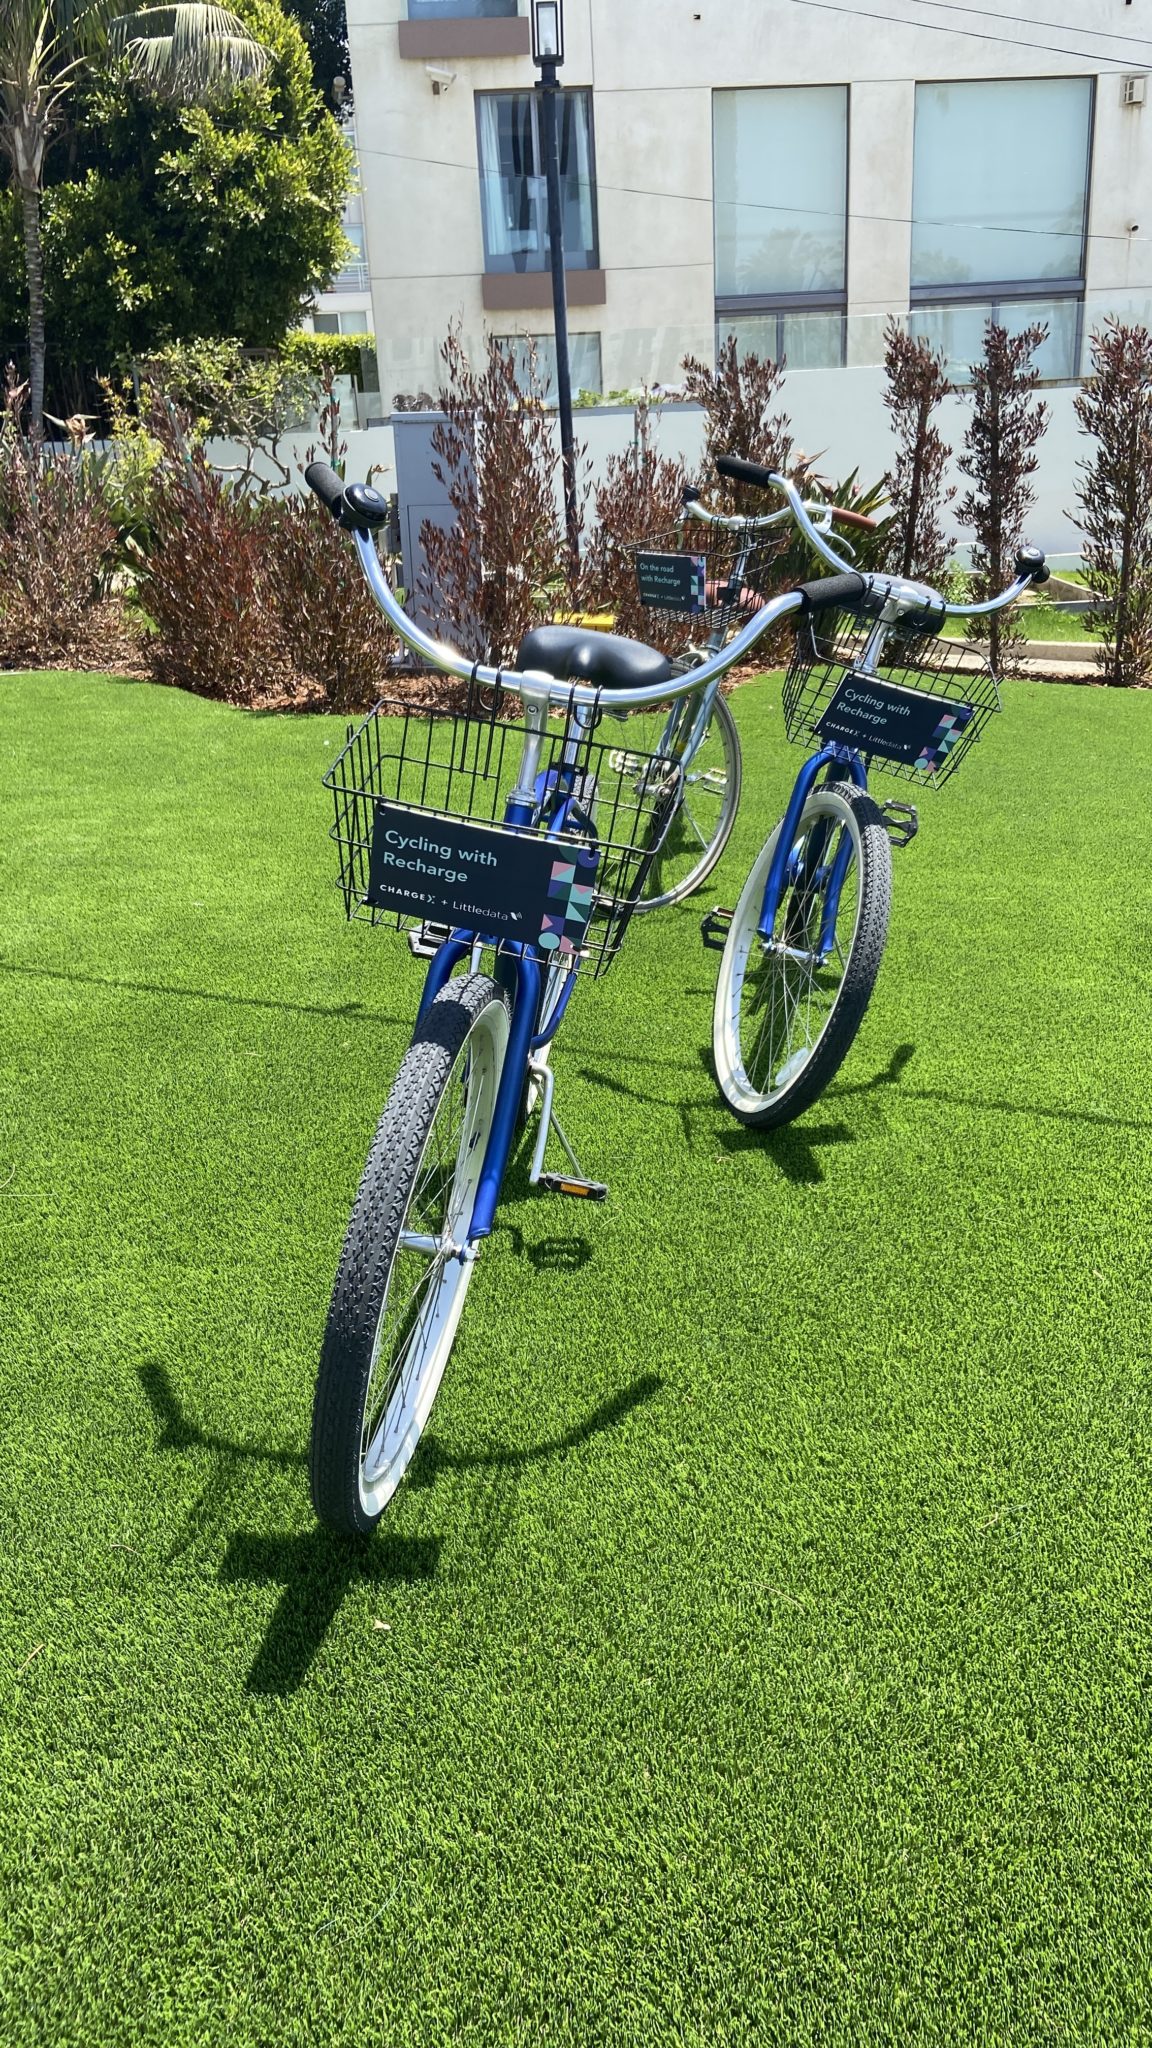 Two blue bikes with ChargeX branding on their front baskets standing with their kickstands on some grass ready for attendees to ride.